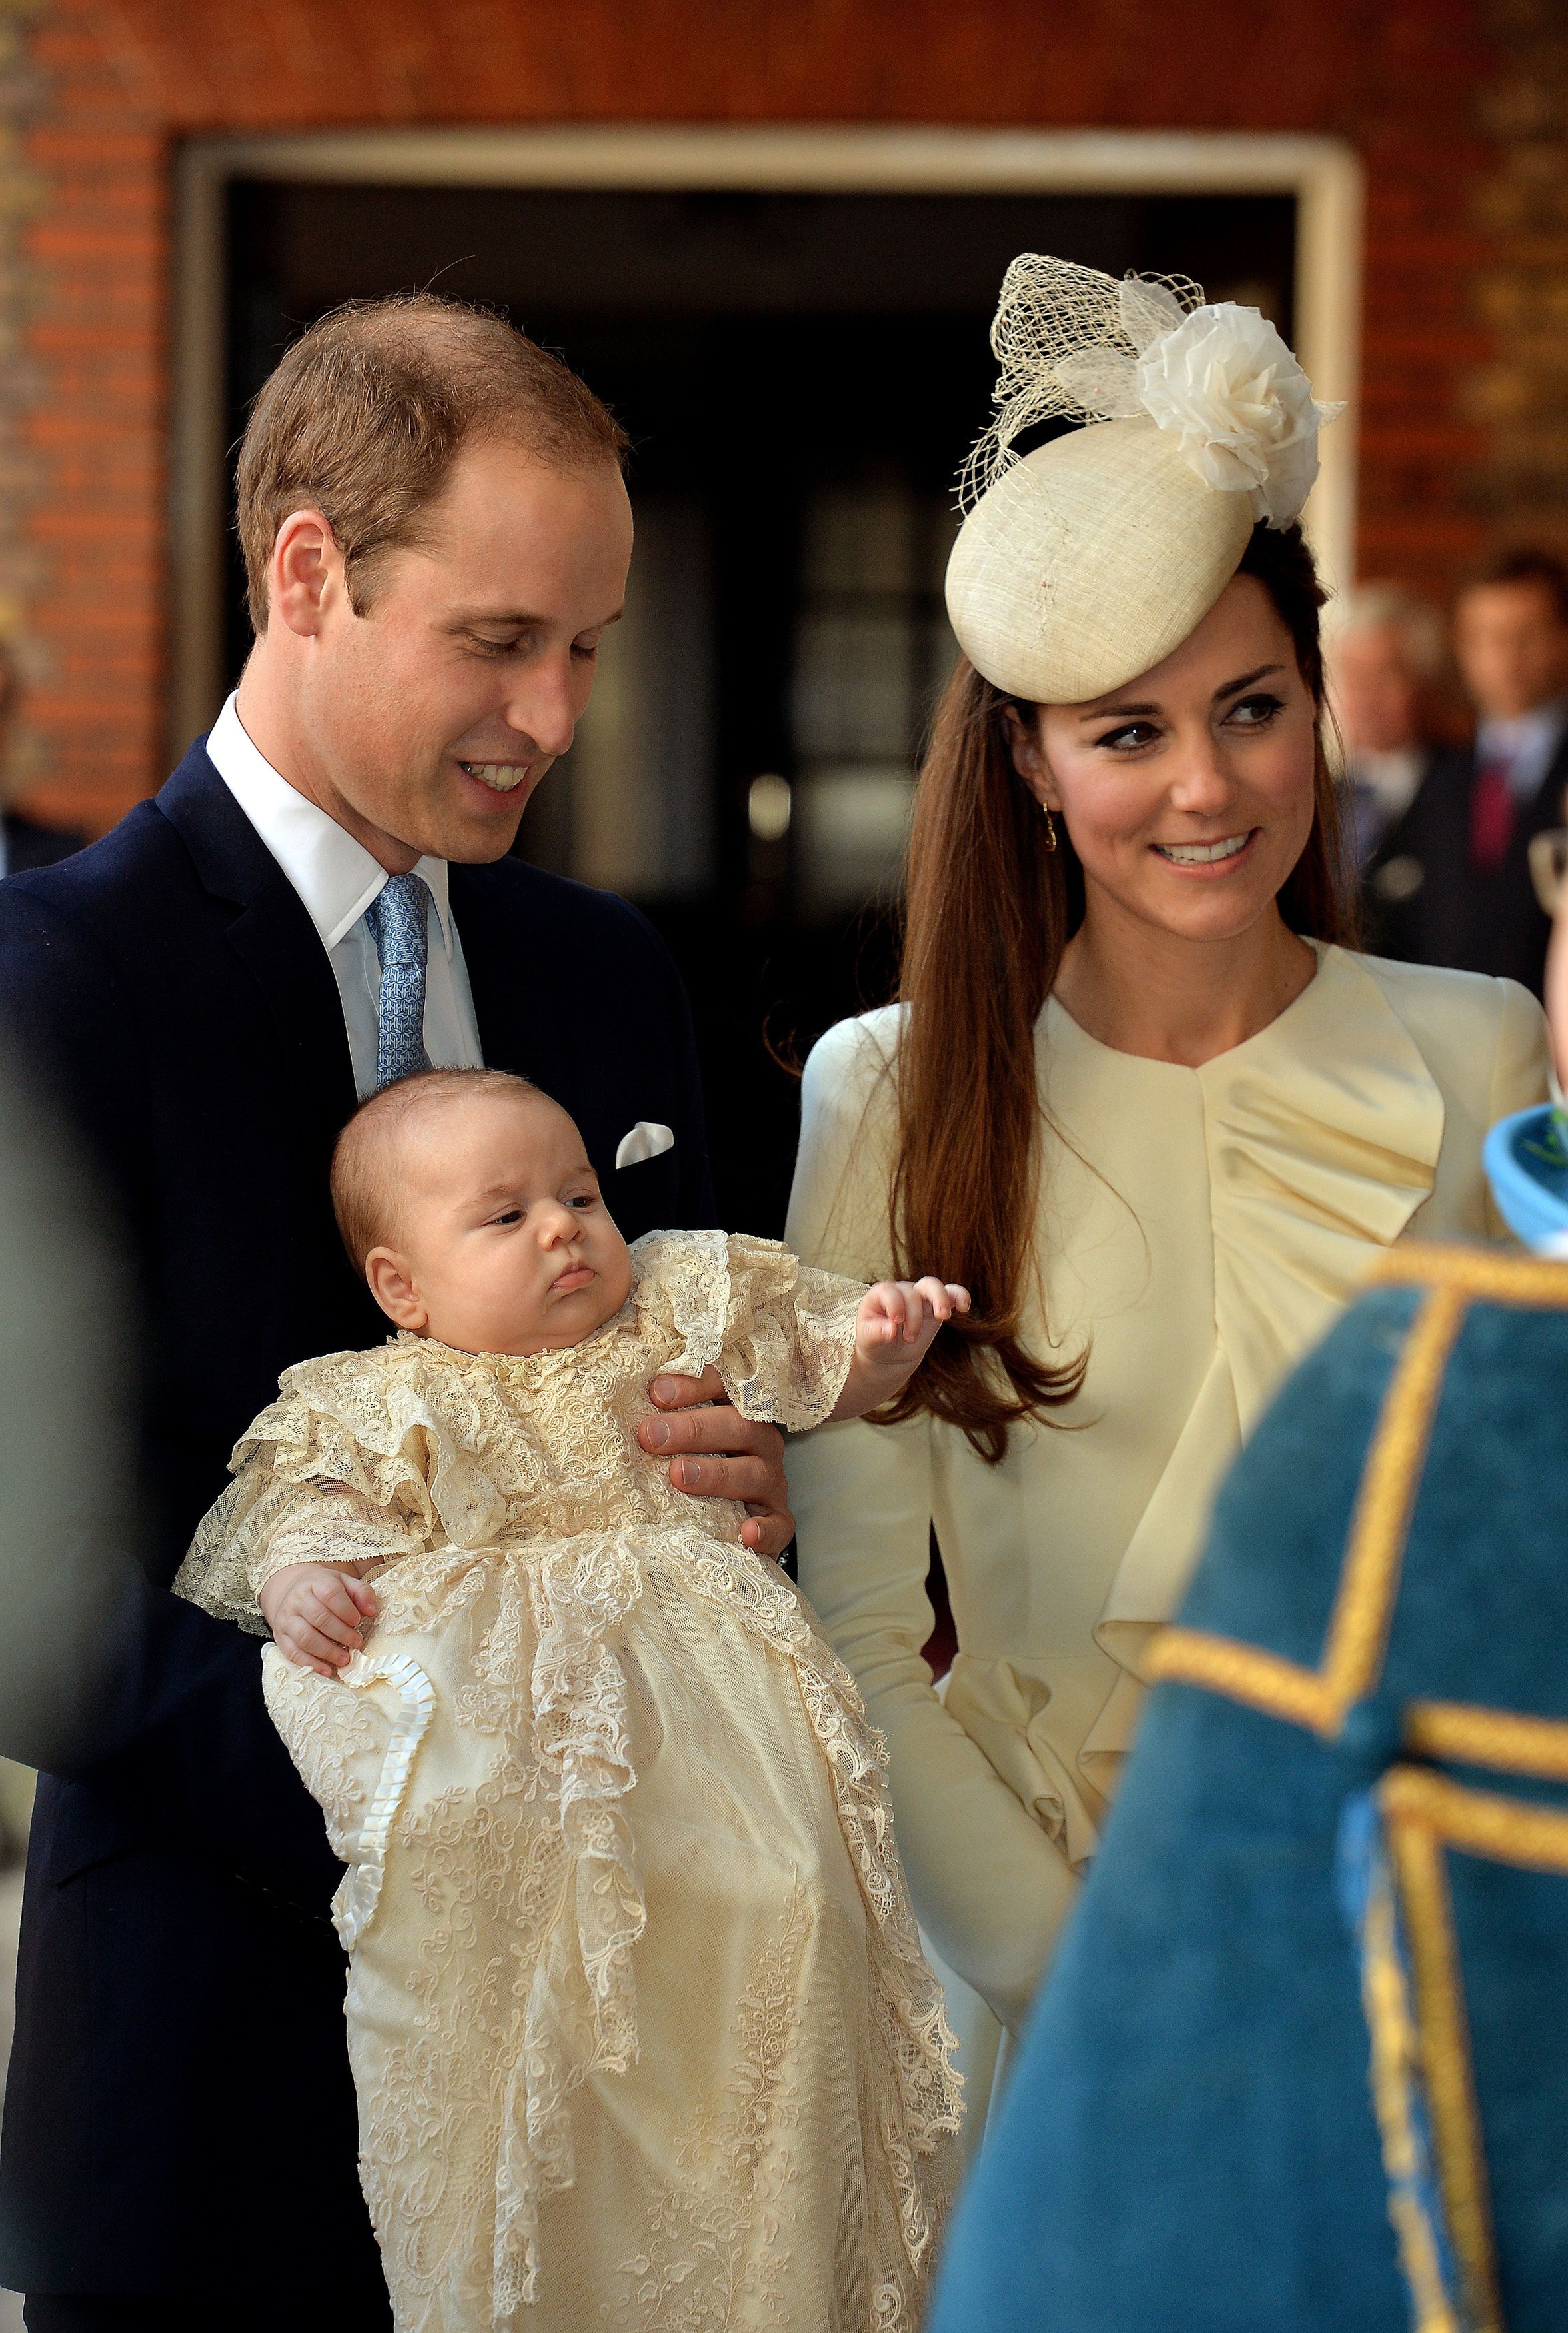 The Duke and Duchess with the baby